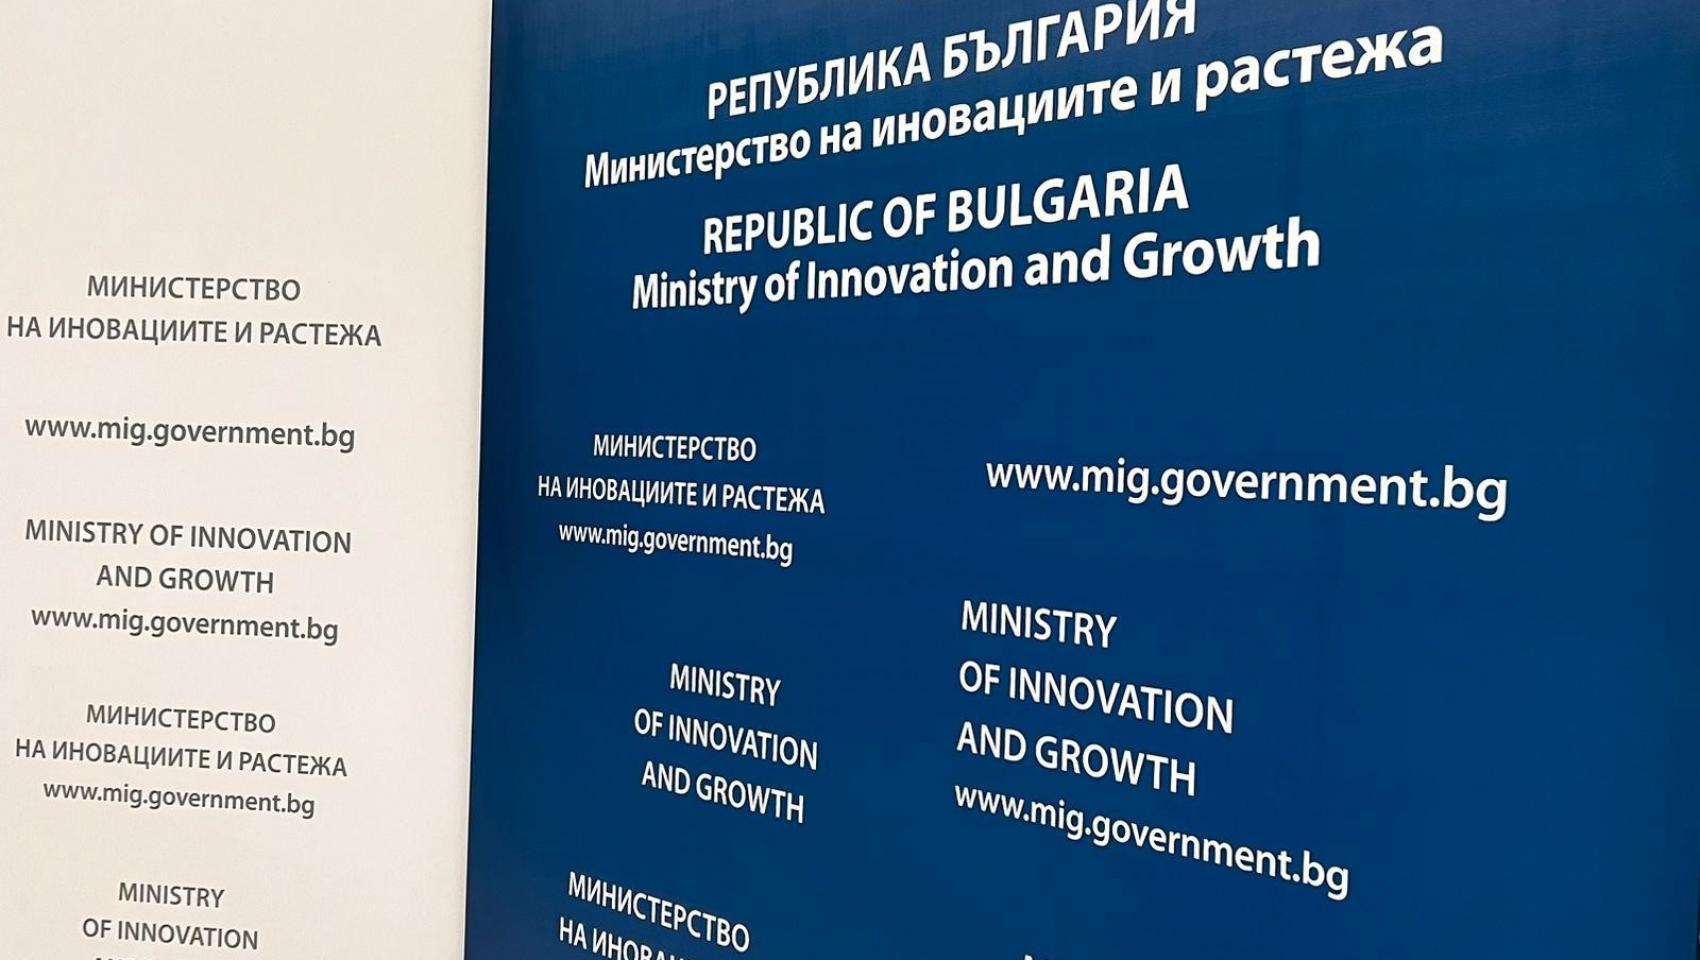 By the end of 2023, the Ministry of Innovation and